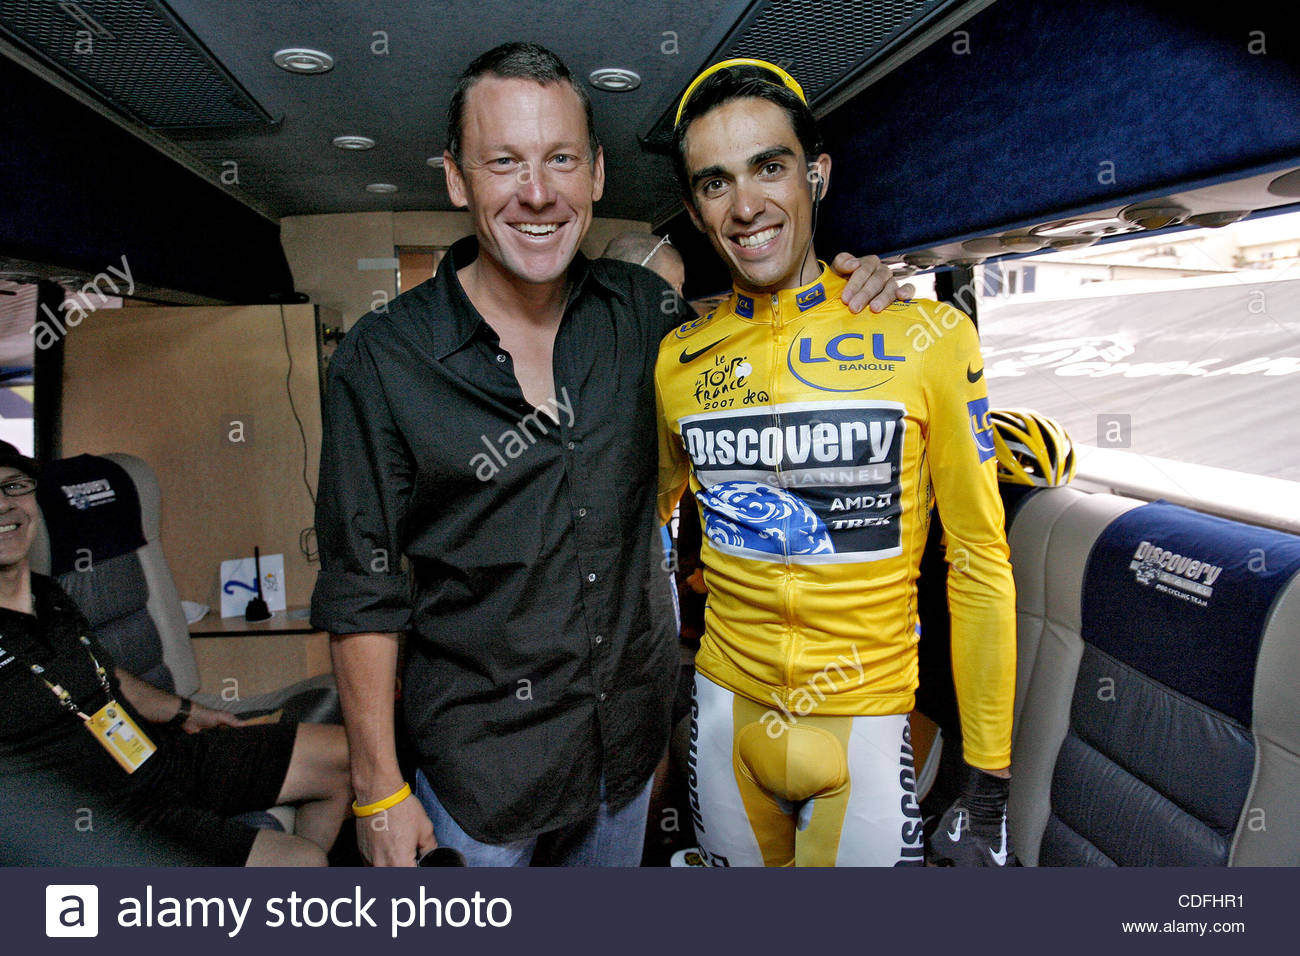 ¿Cuánto mide Lance Armstrong? - Real height Jul-29-2007-marcoussis-france-2007-tour-de-france-champion-and-discovery-CDFHR1